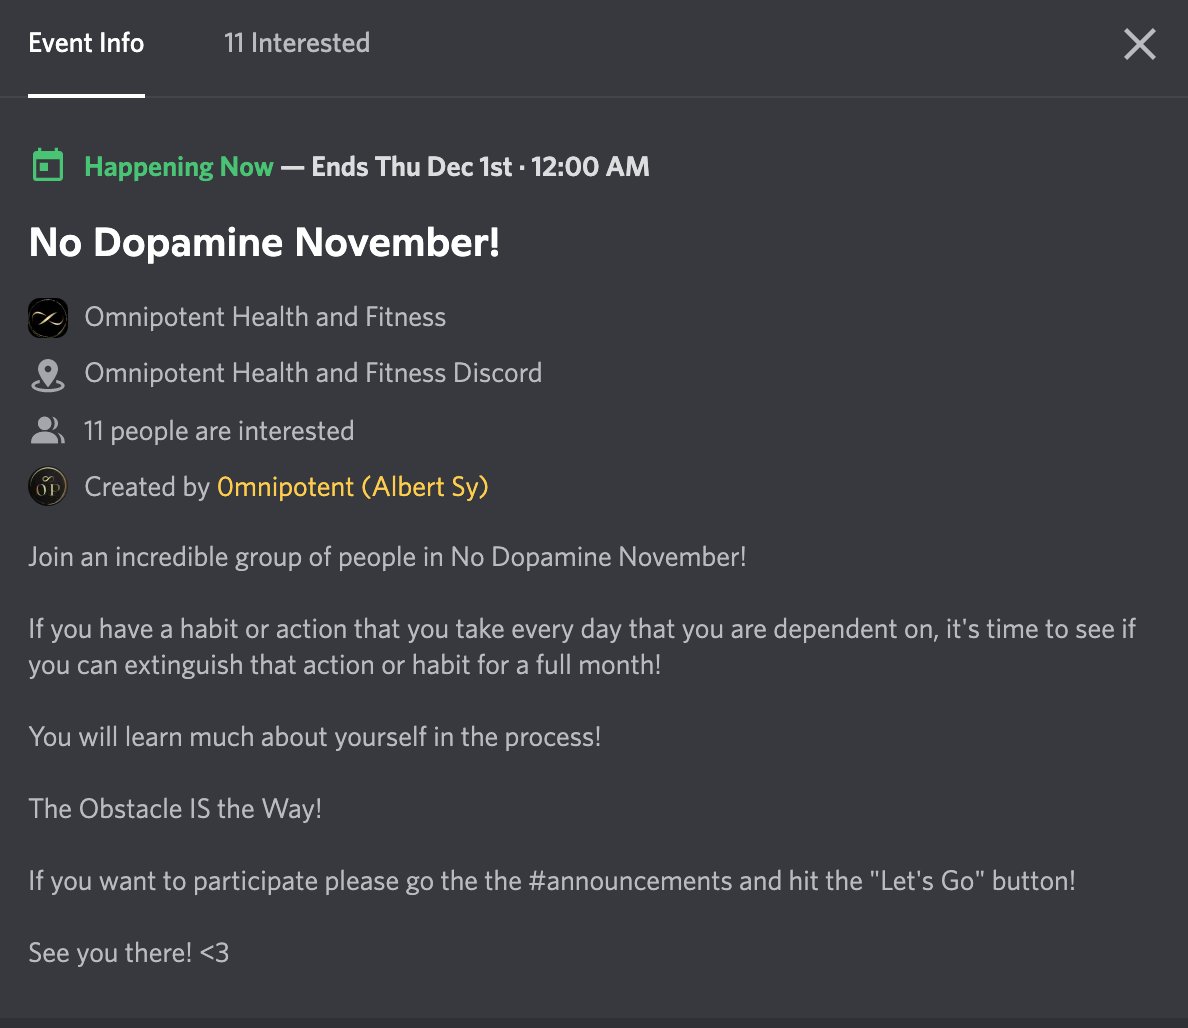 #NoDopamineNovember is happening starting today in my discord server! 

Join an amazing and supportive community and see how your life can #transform in a month!

#TheObstacleIsTheWay

Link in bio description!